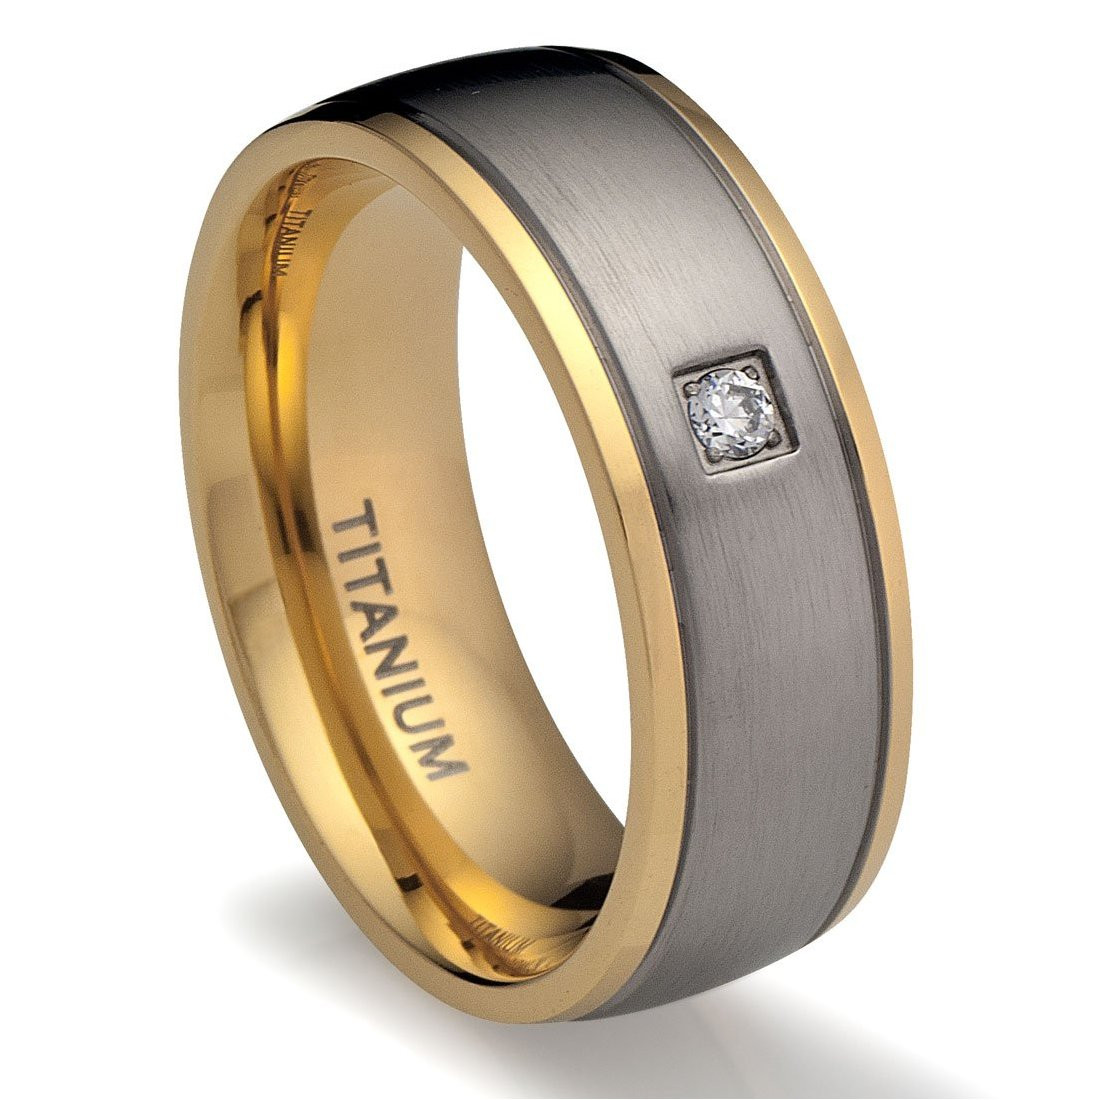 Wedding Ring For Men
 Keep these Points in Mind When Picking Men’s Wedding Bands